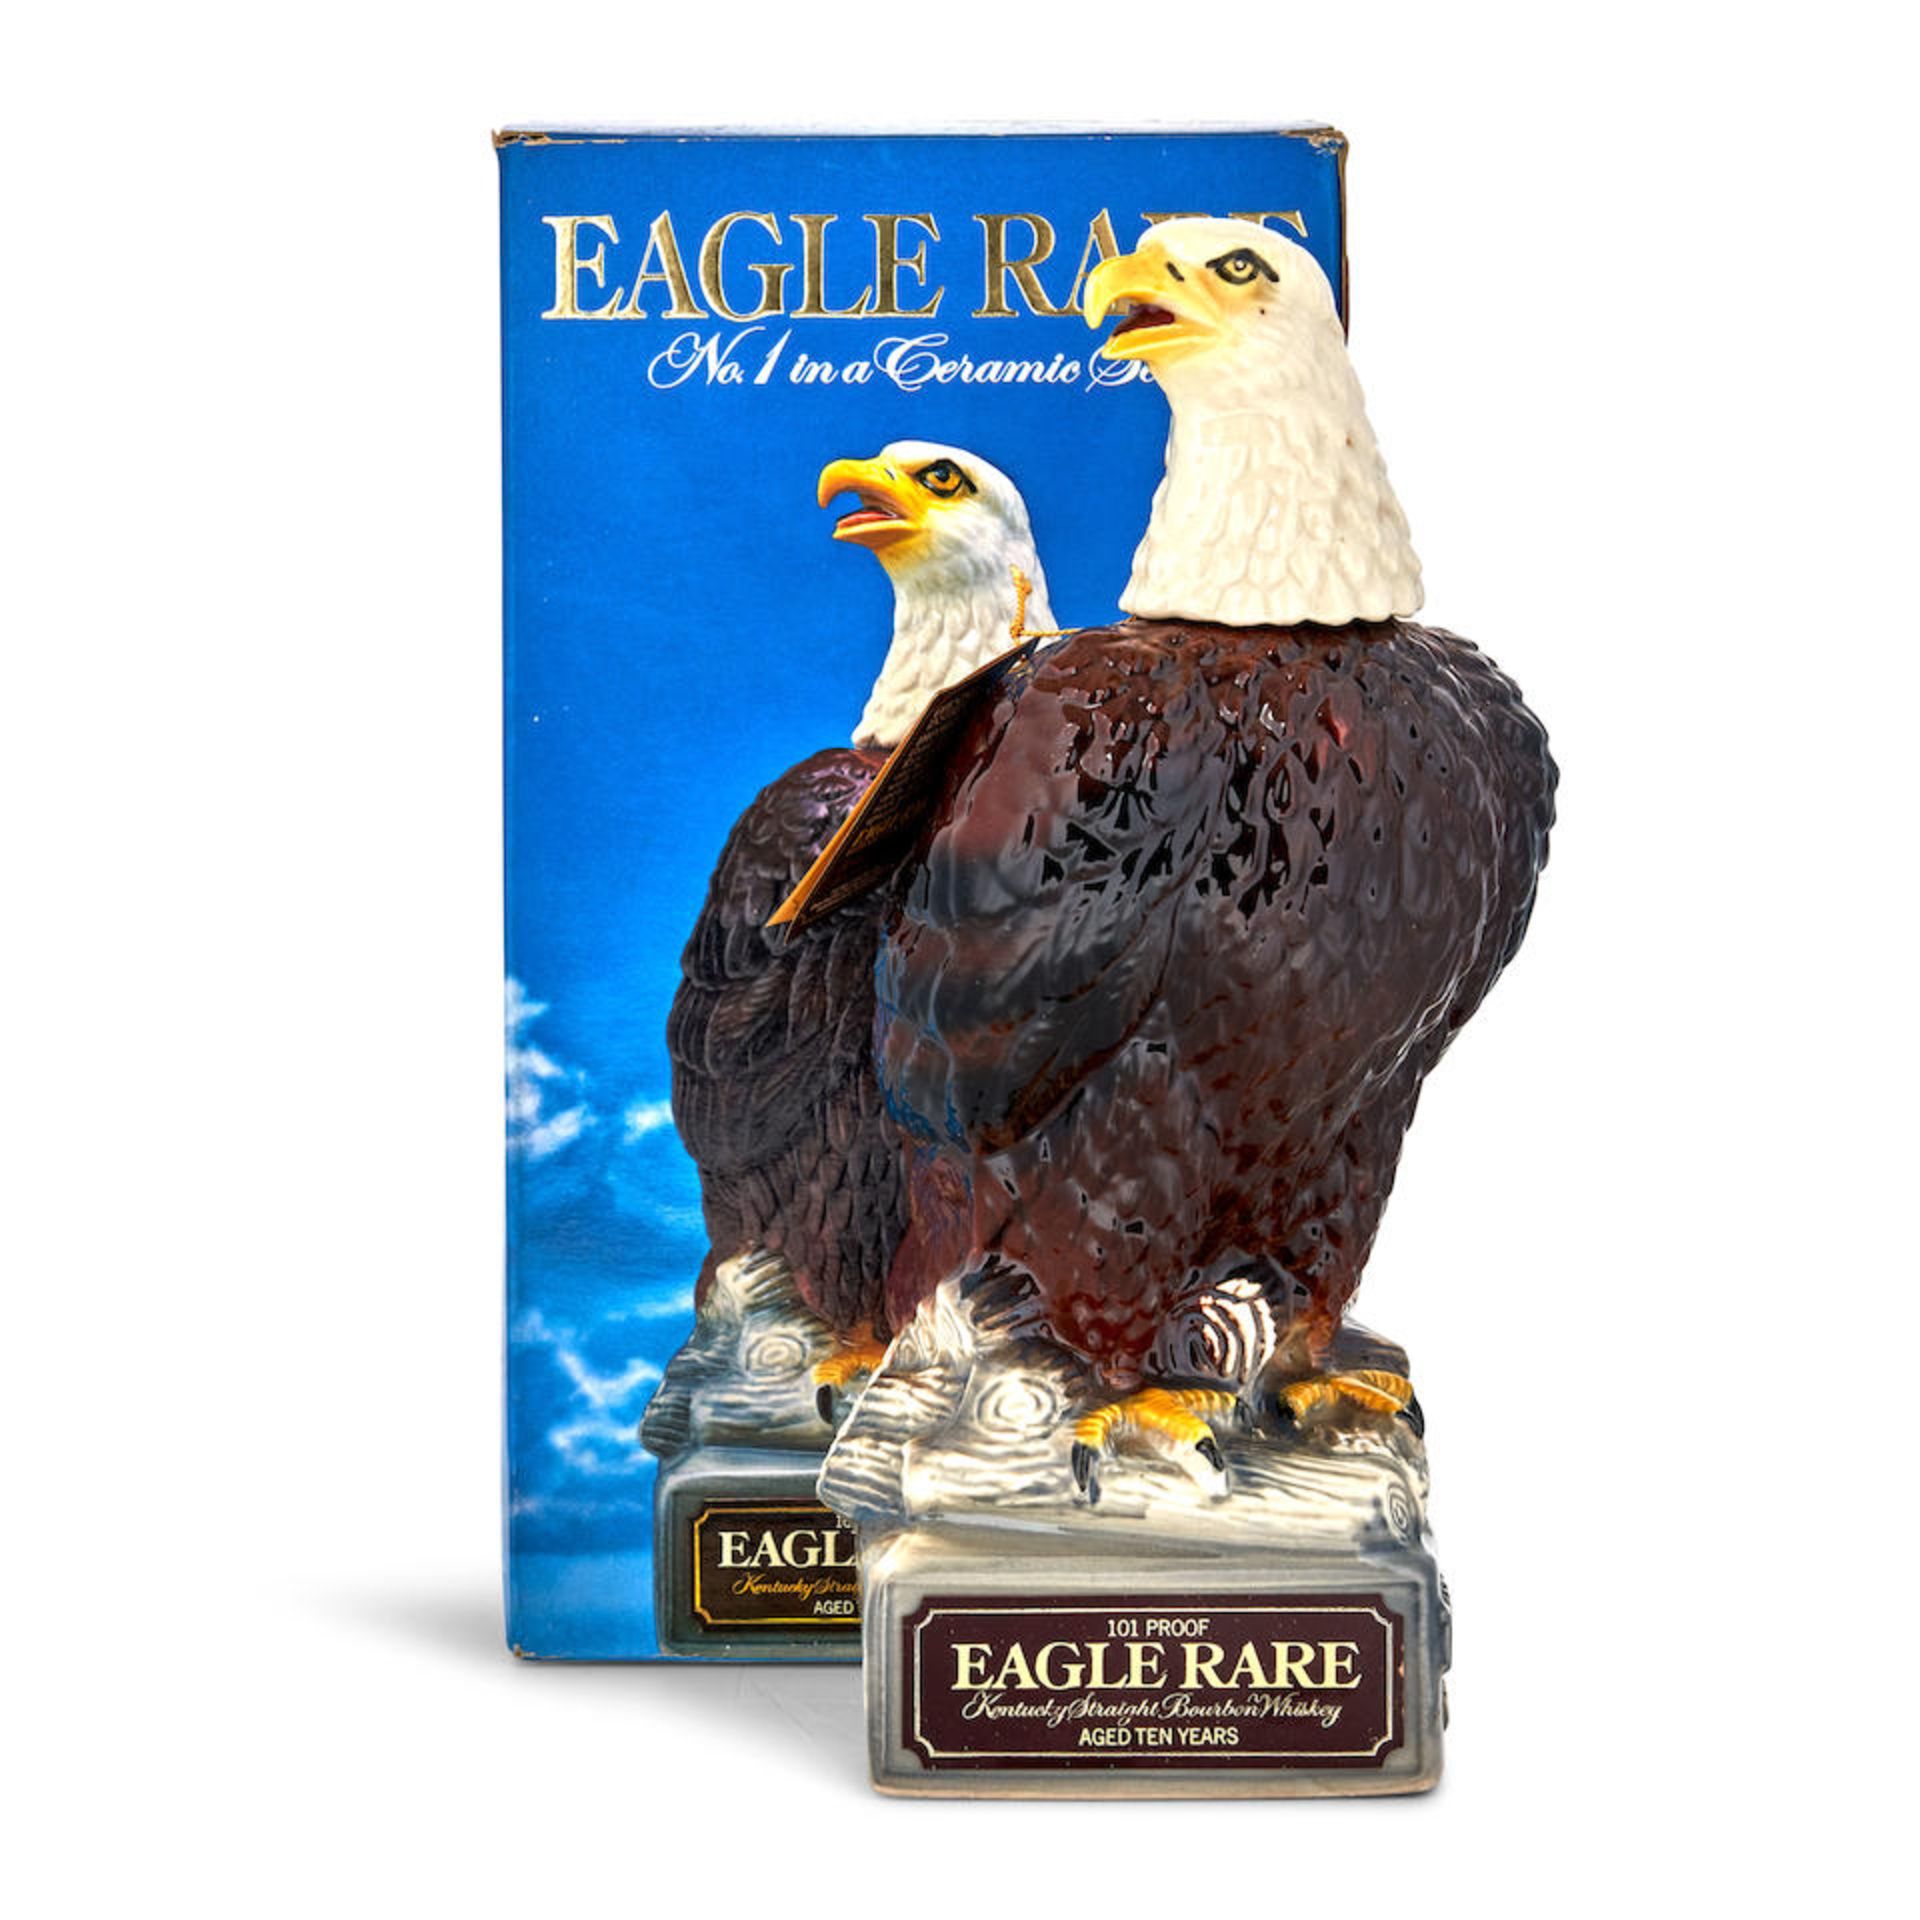 Eagle Rare 10 Years Old Decanter 1979 (1 750ml bottle)